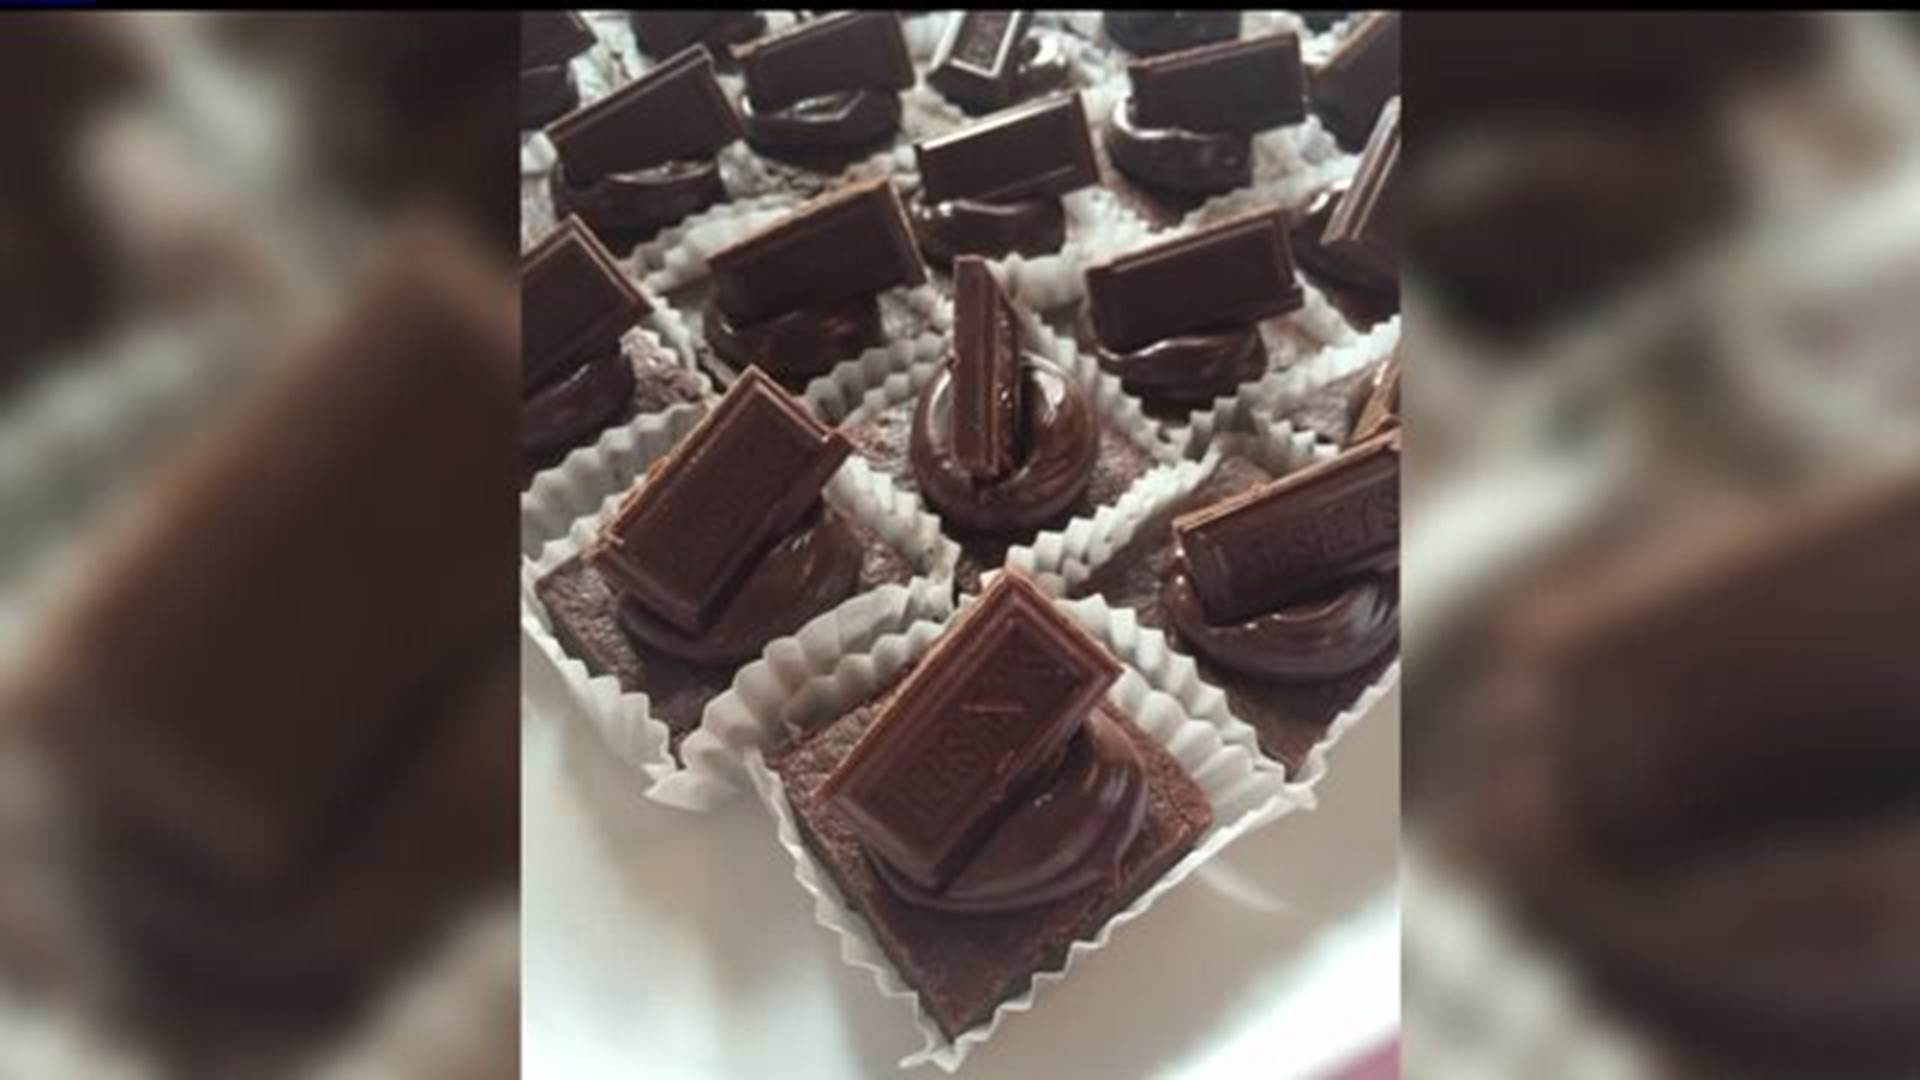 Mark your calendar with these sweet happenings in Hershey